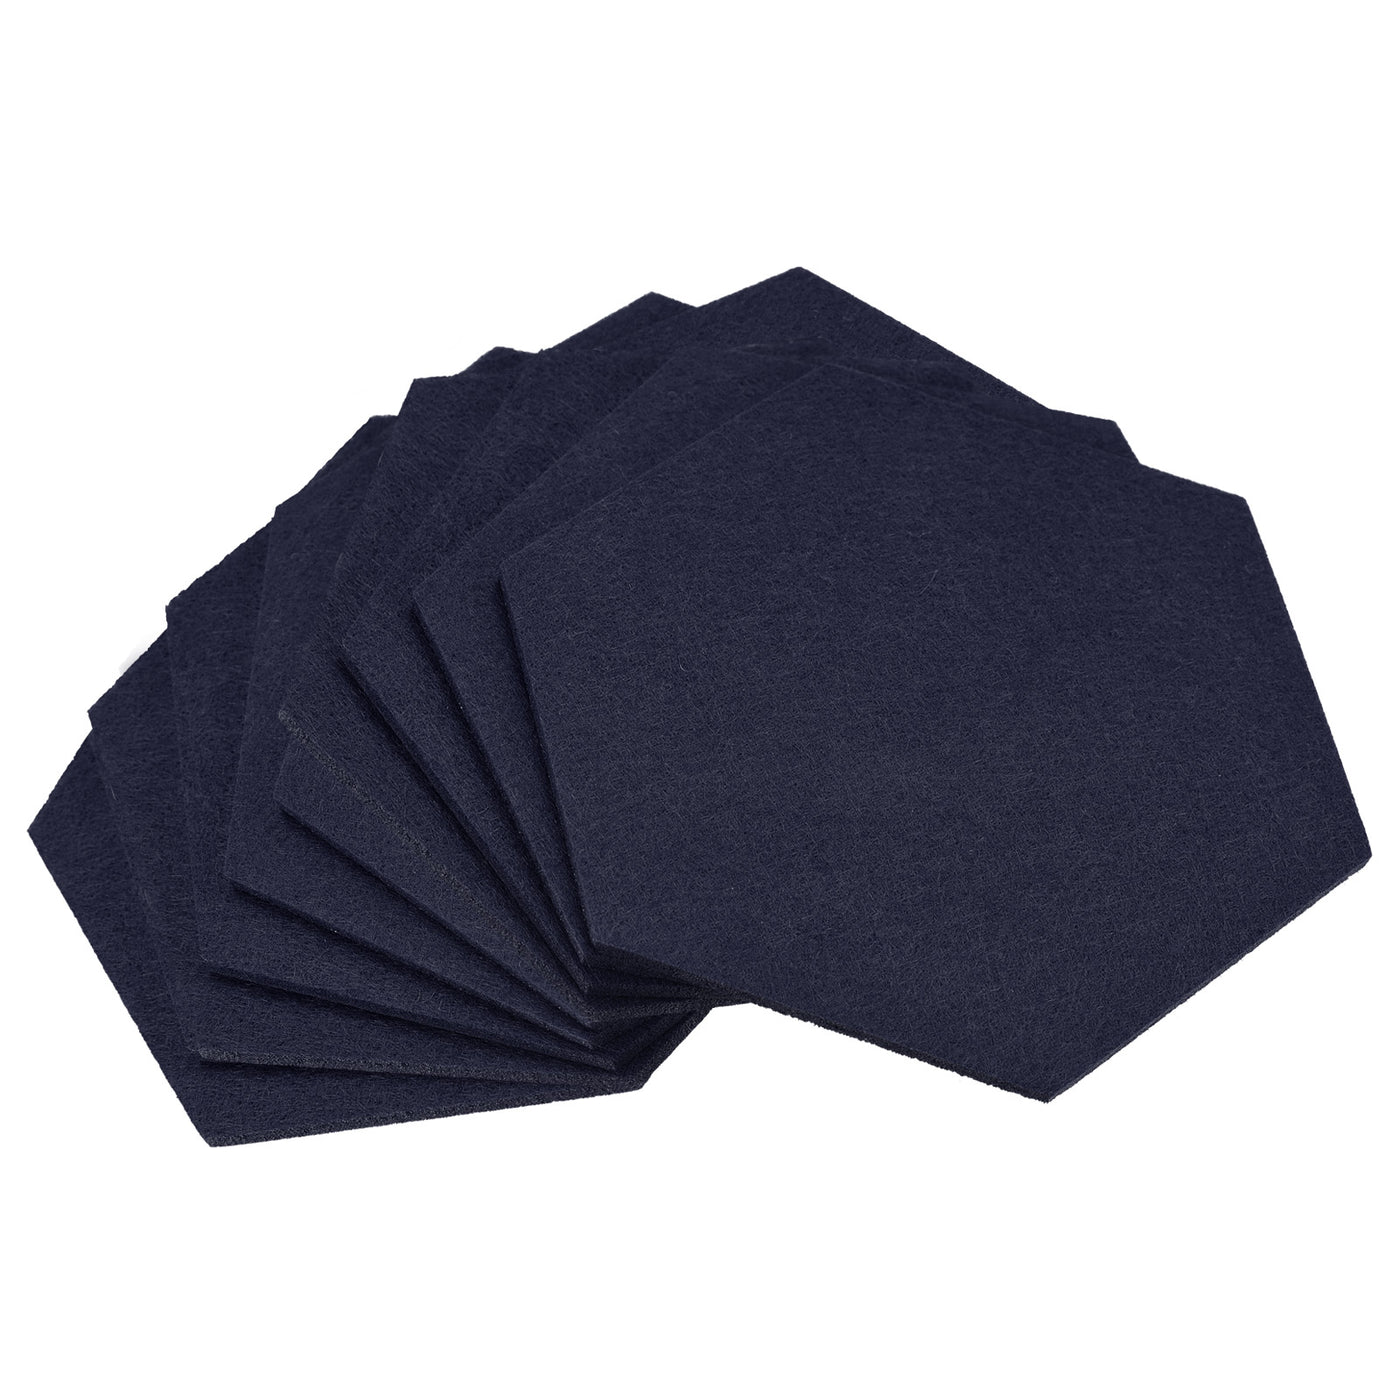 uxcell Uxcell Felt Coasters 9pcs Absorbent Pad Coaster for Drink Cup Pot Bowl Vase Dark Blue